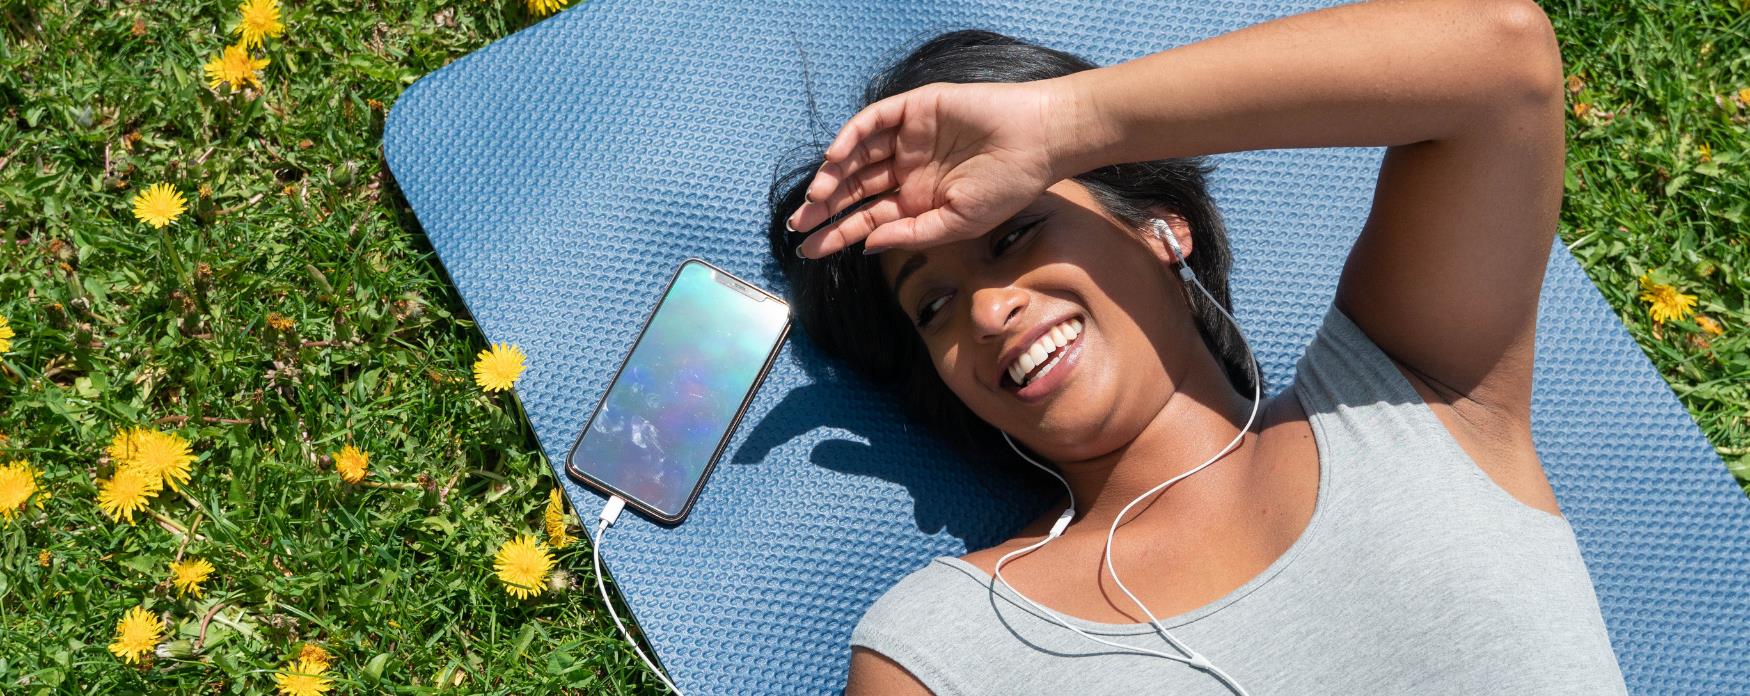 woman with headphones and phone lying on yoga mat in park